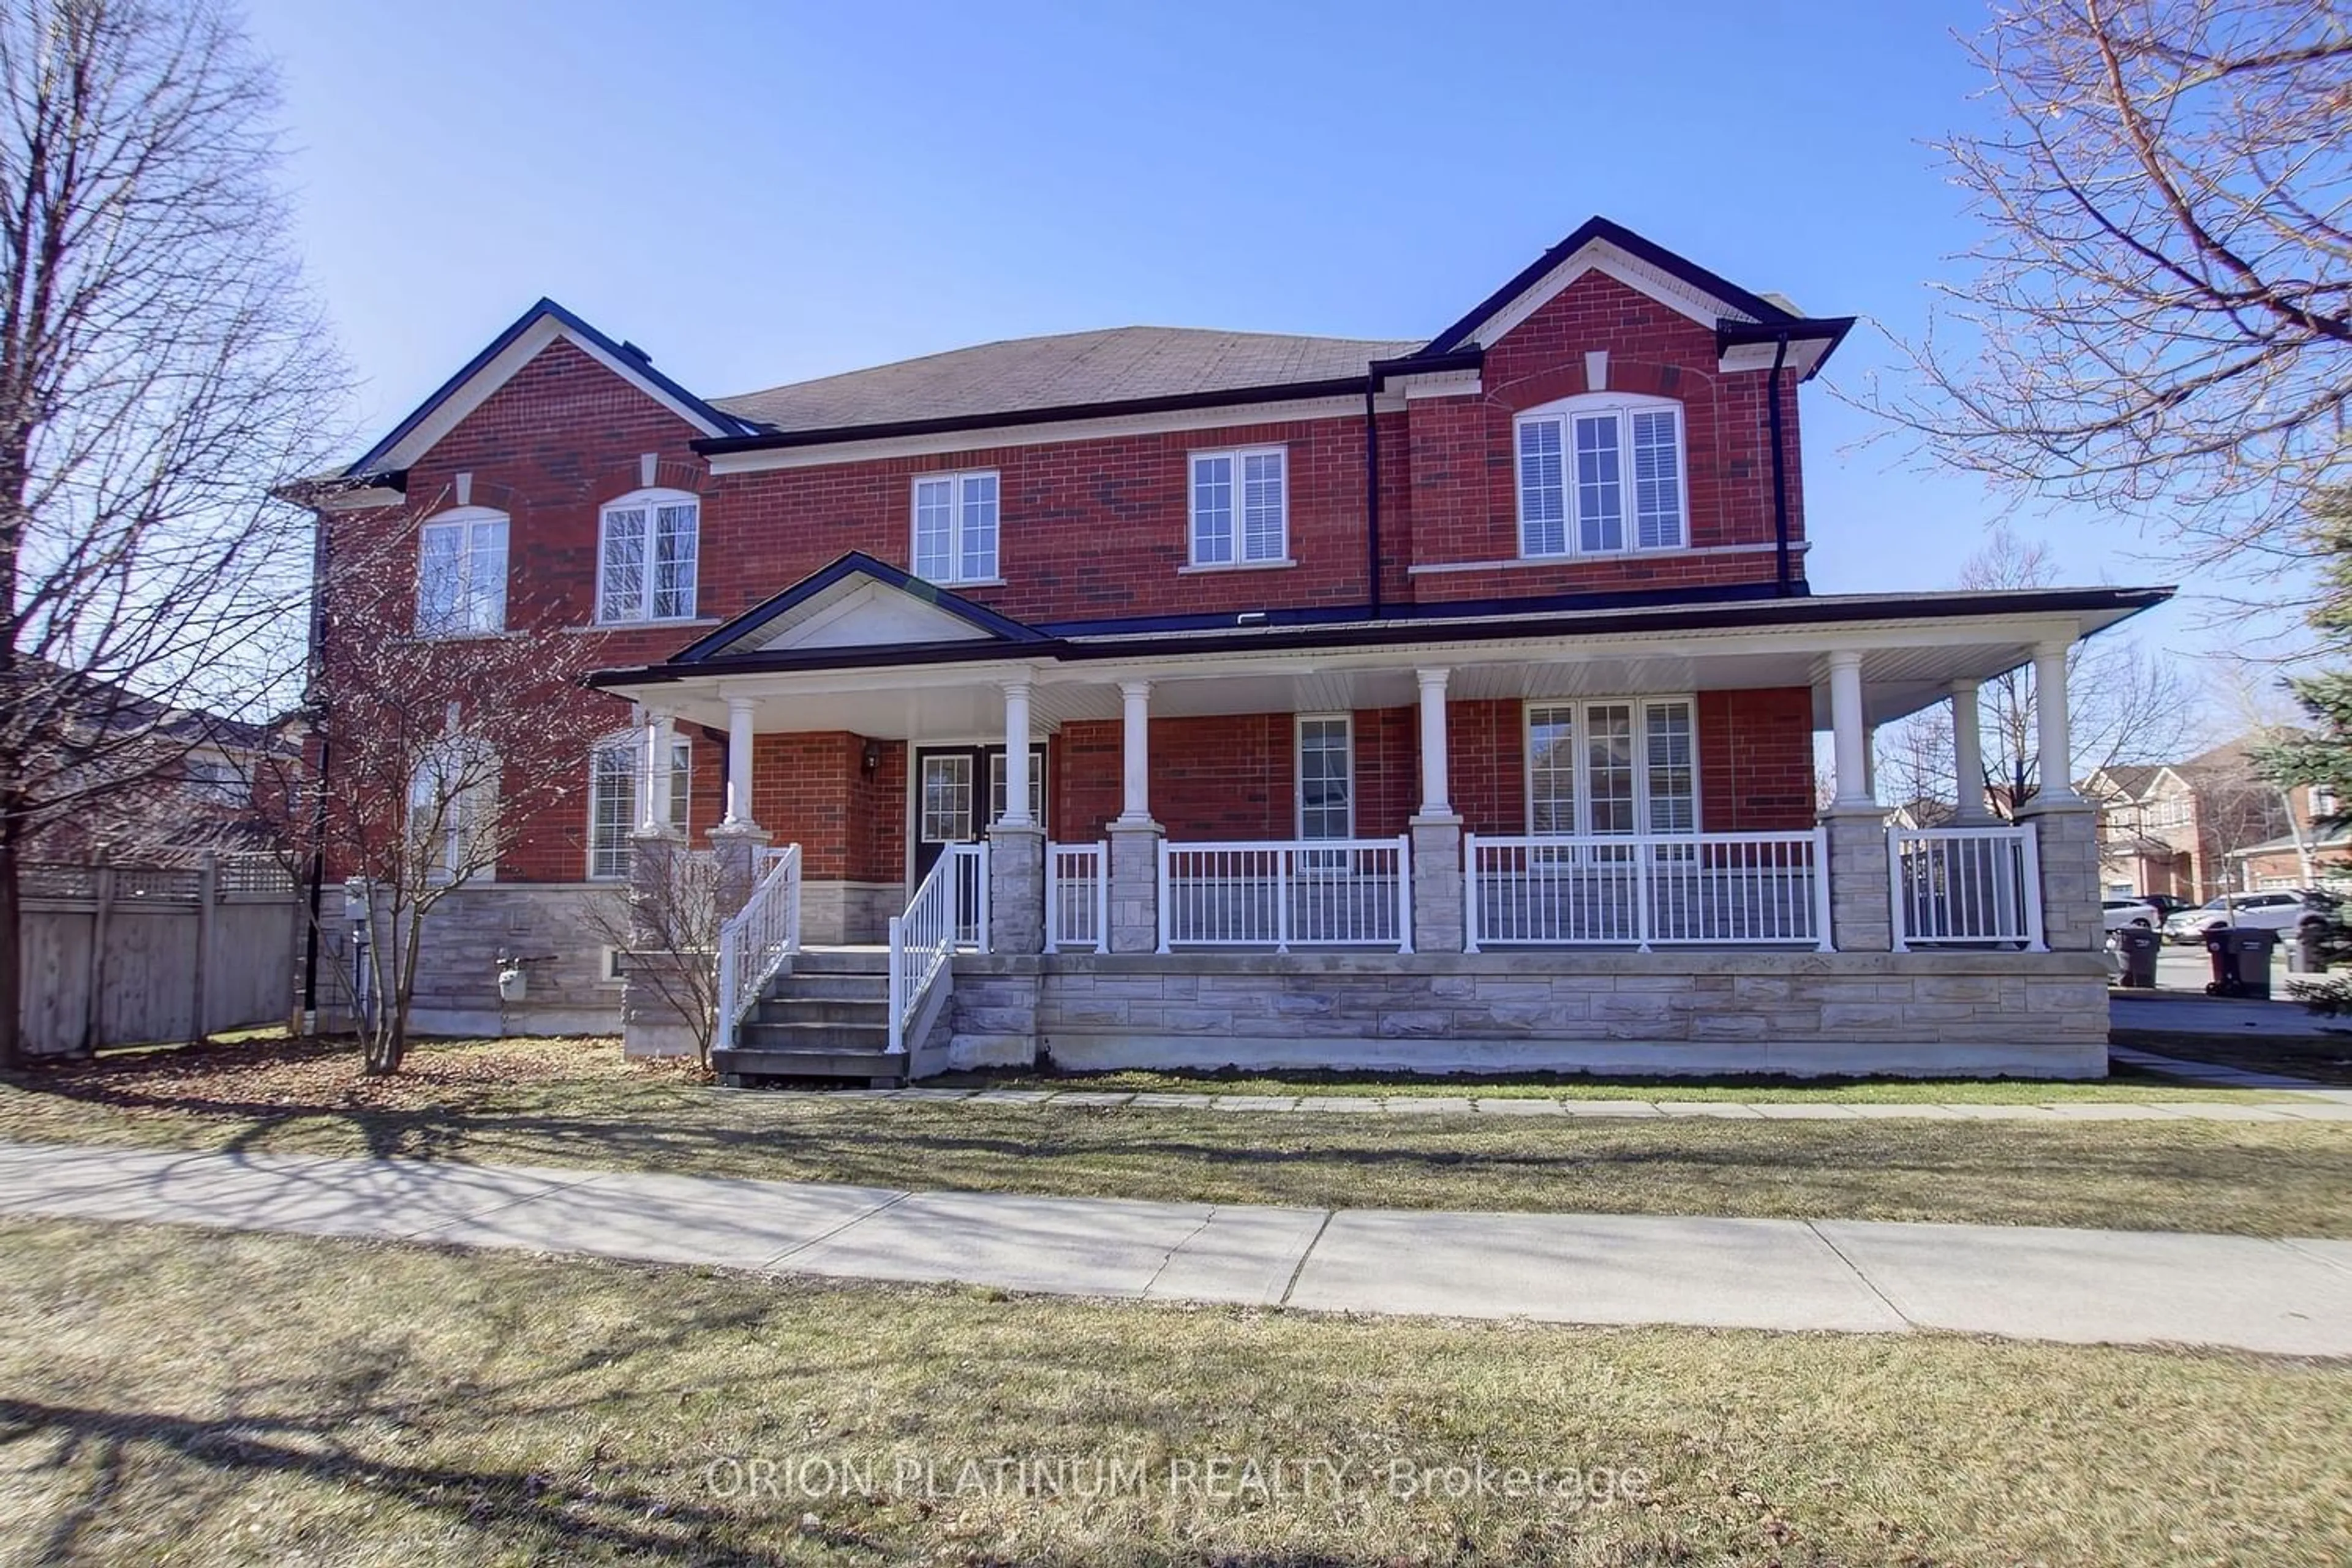 Home with brick exterior material for 3866 Stardust Dr, Mississauga Ontario L5M 7Z9